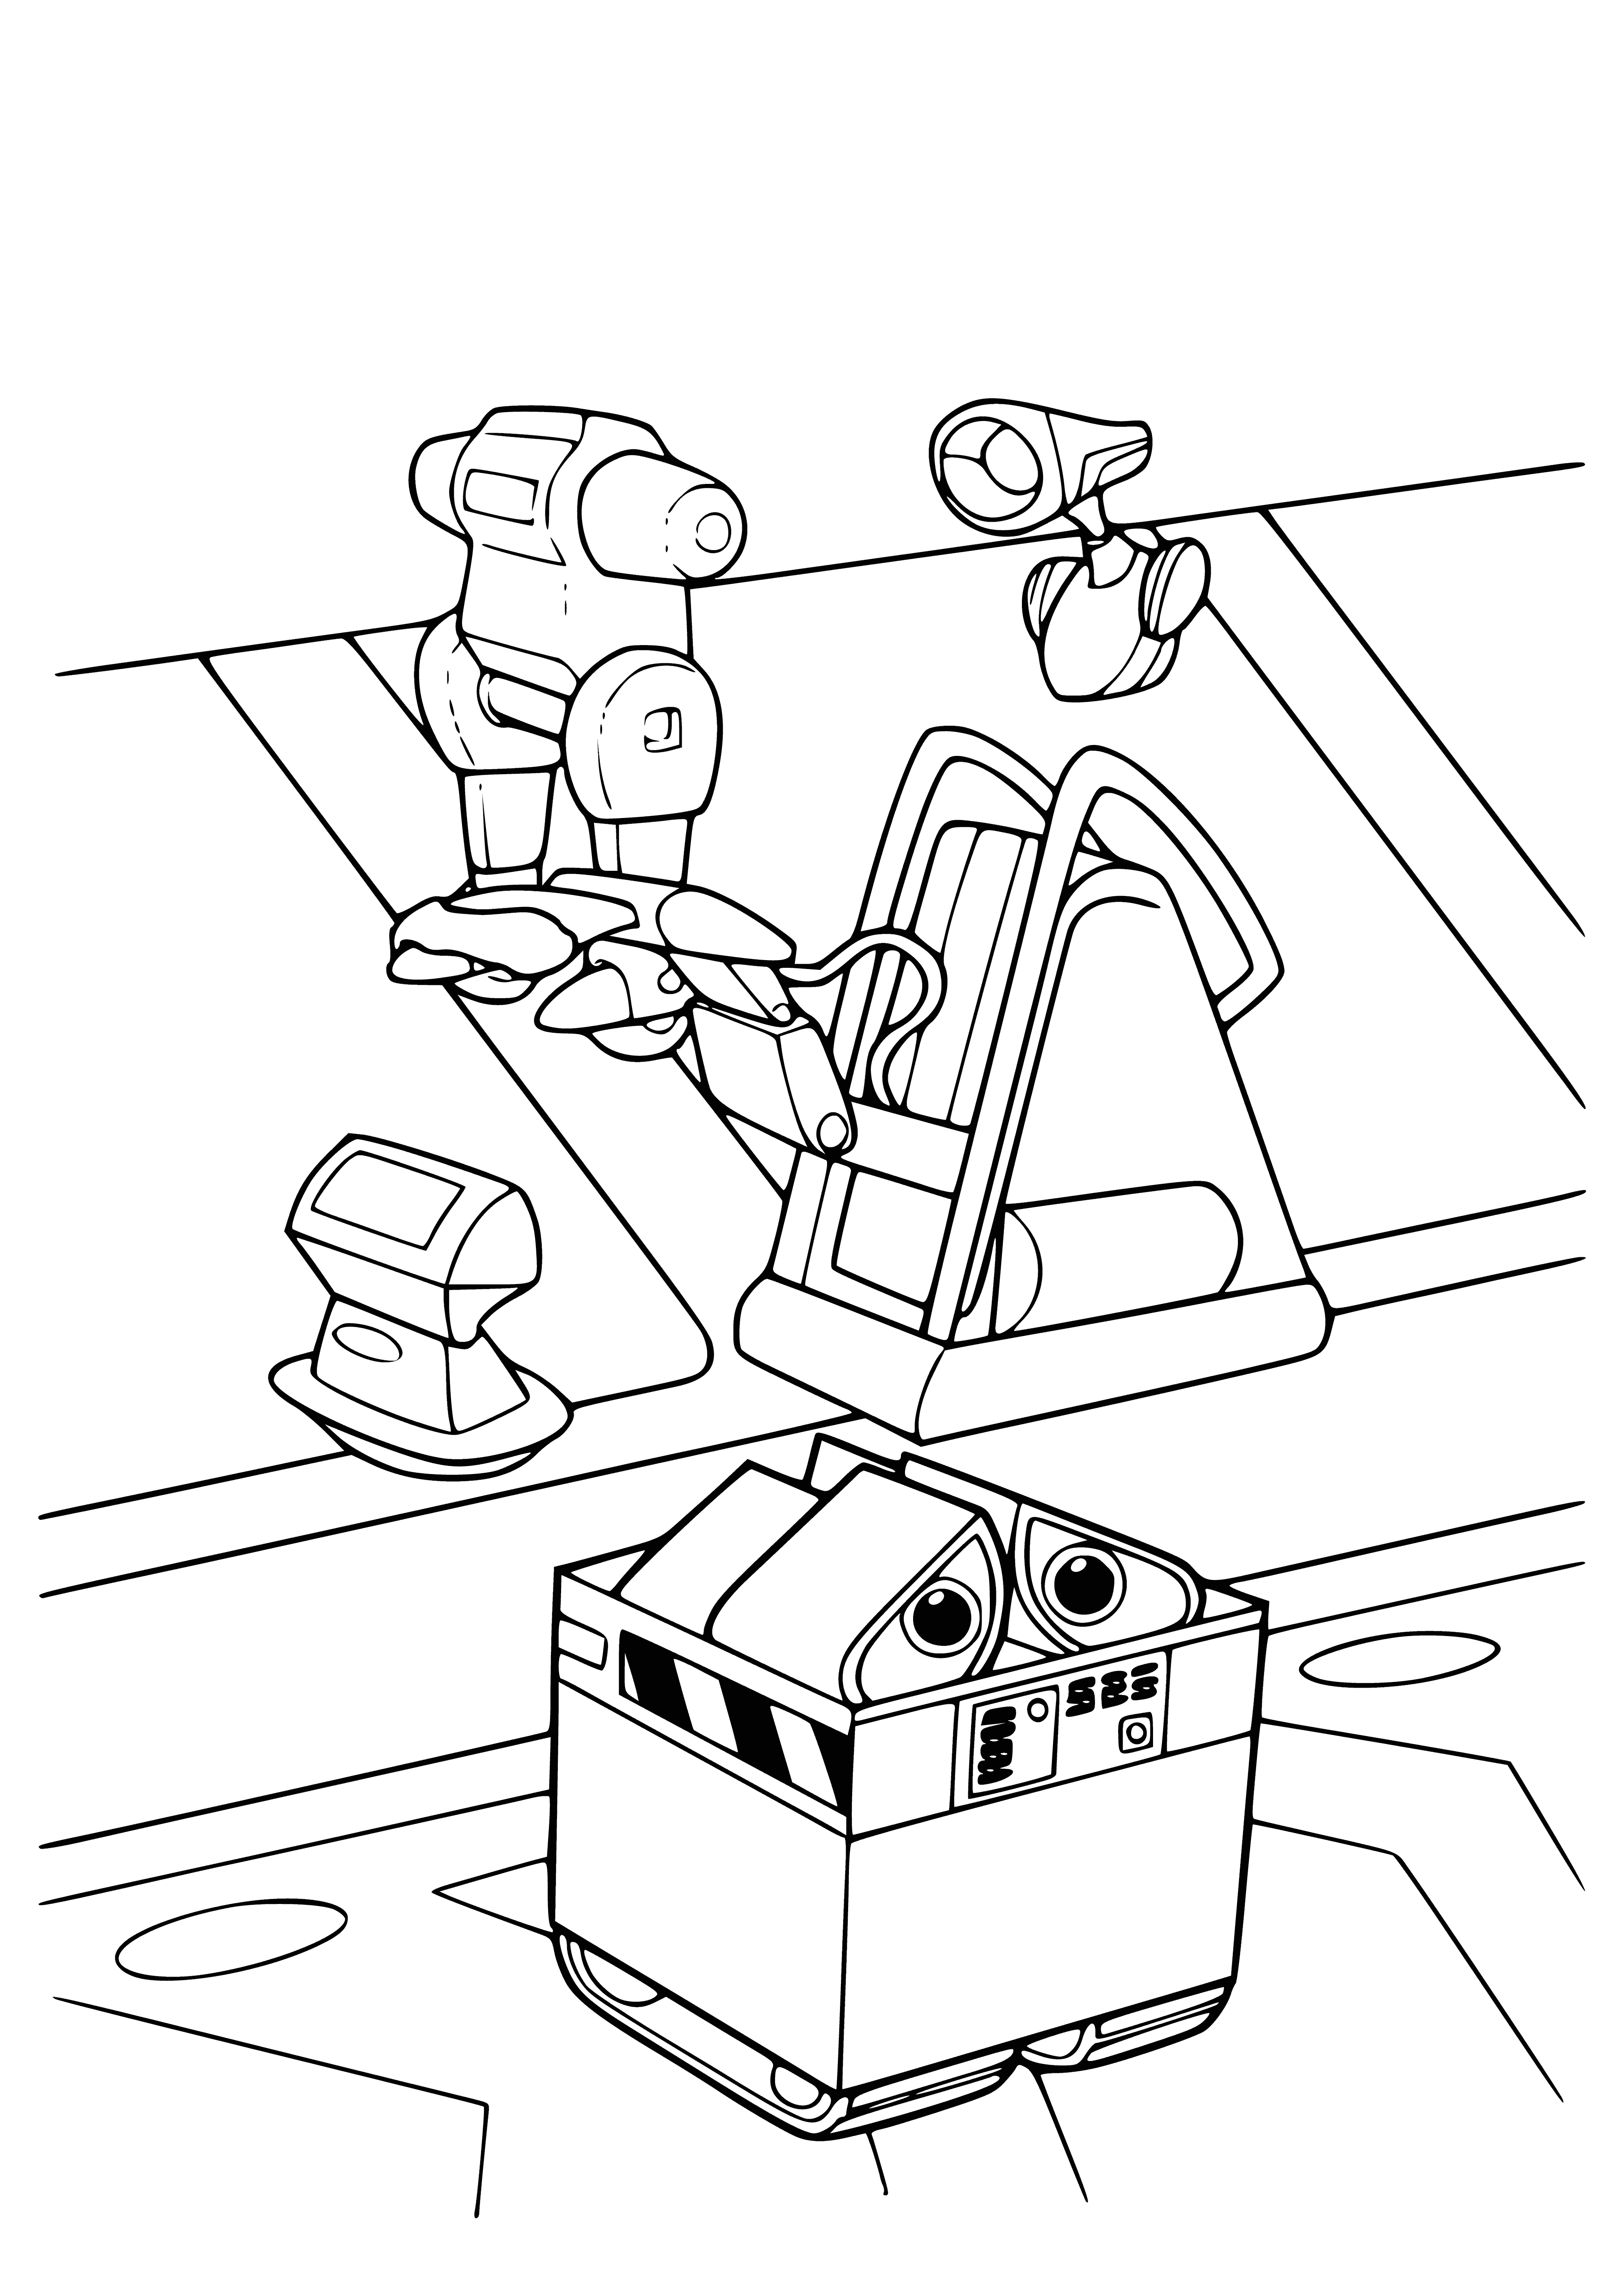 coloring page: Robot squatting with glowing red eyes and antennas holds plant in metal claw, surrounded by rubbish.